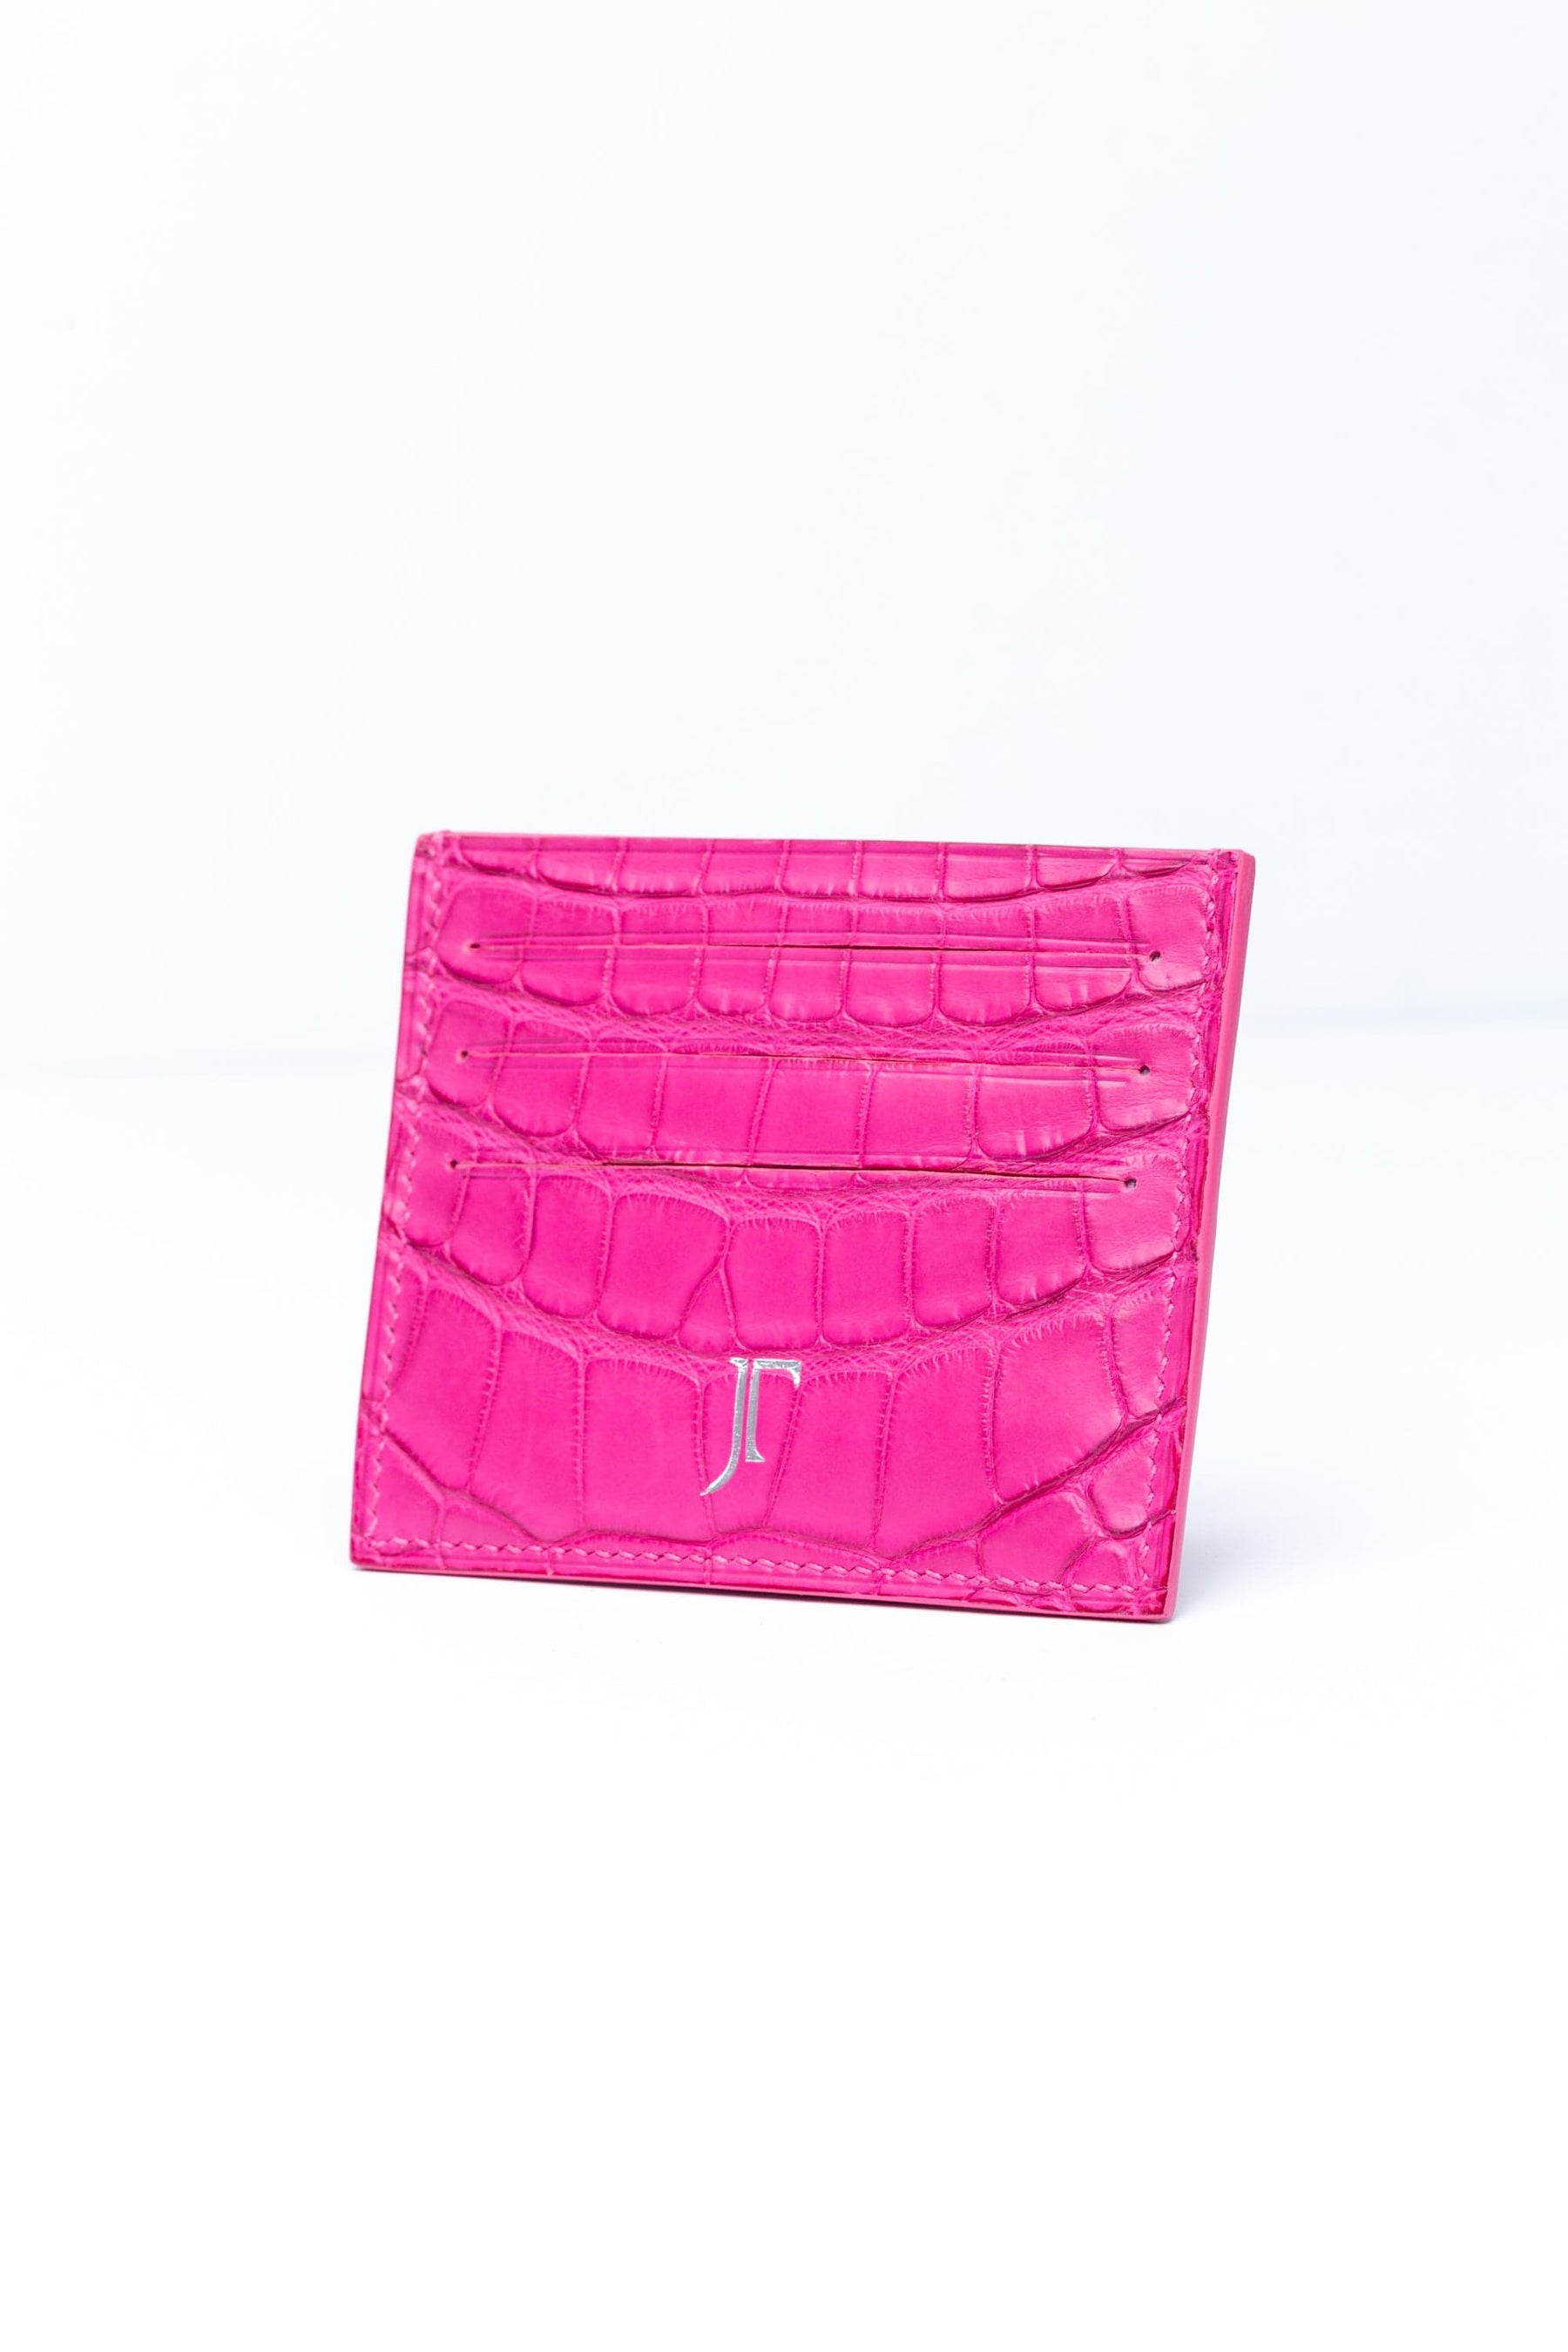 Bungus Pink Tamagini Wallet The Card | Leather - Hot Edition Endicott